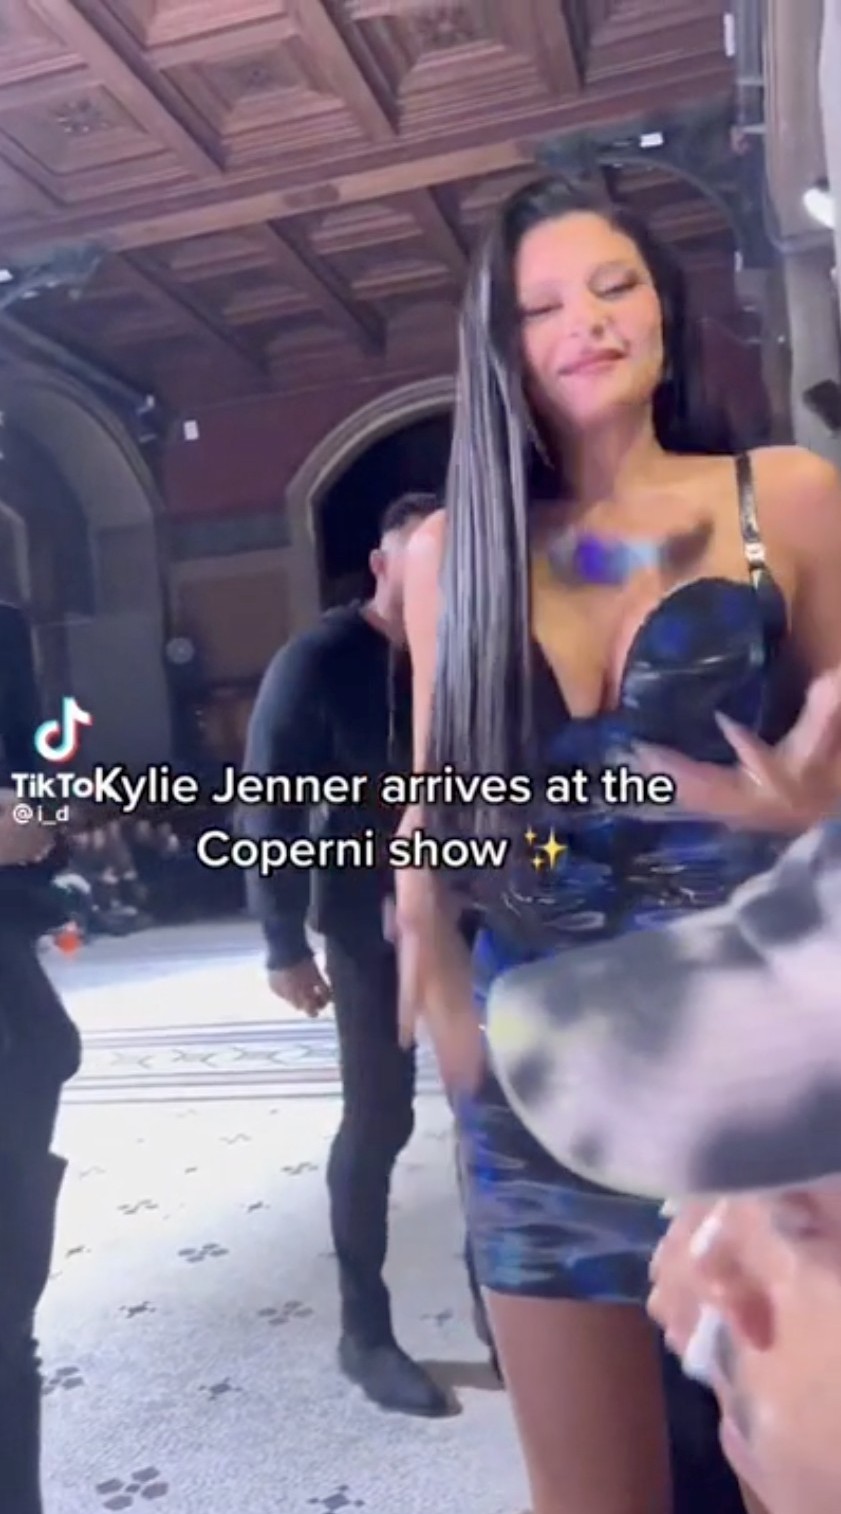 Kylie Jenner mocked by fans for ’embarrassing’ moment caught on video during star’s Paris Fashion Week appearance